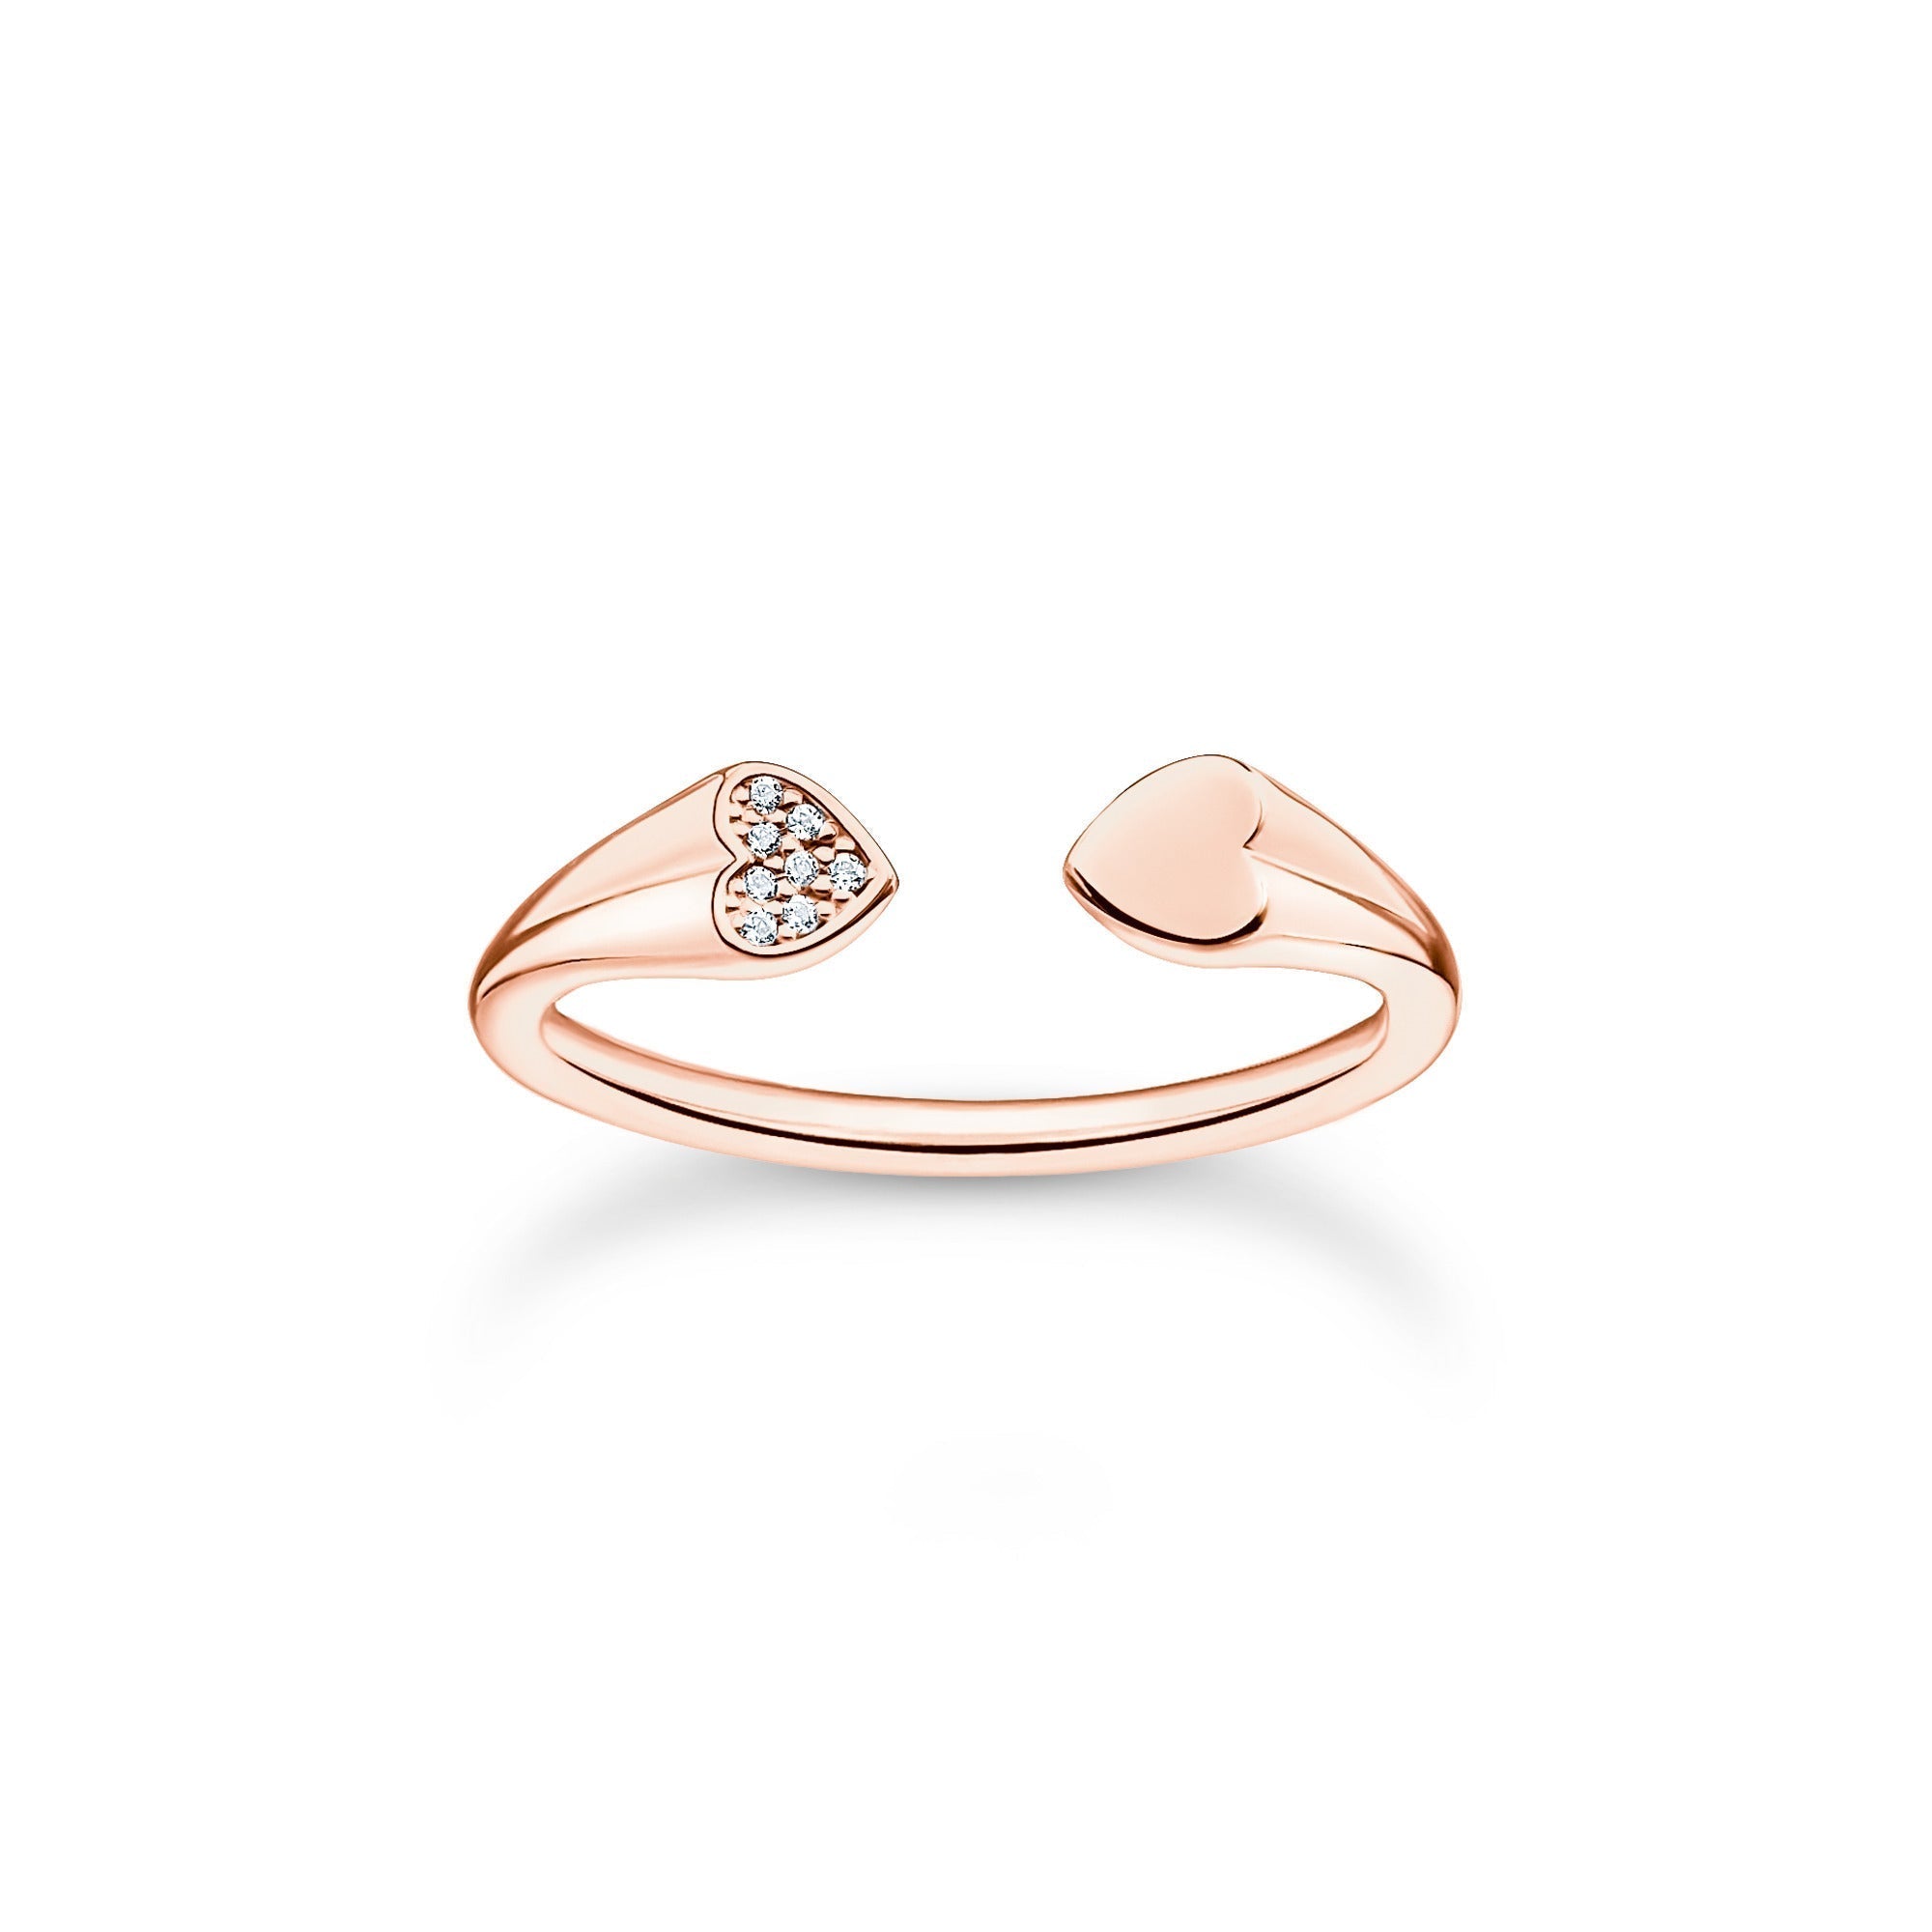 Thomas Sabo Charm Club Rose Gold Plated Sterling Silver Hearts Ring